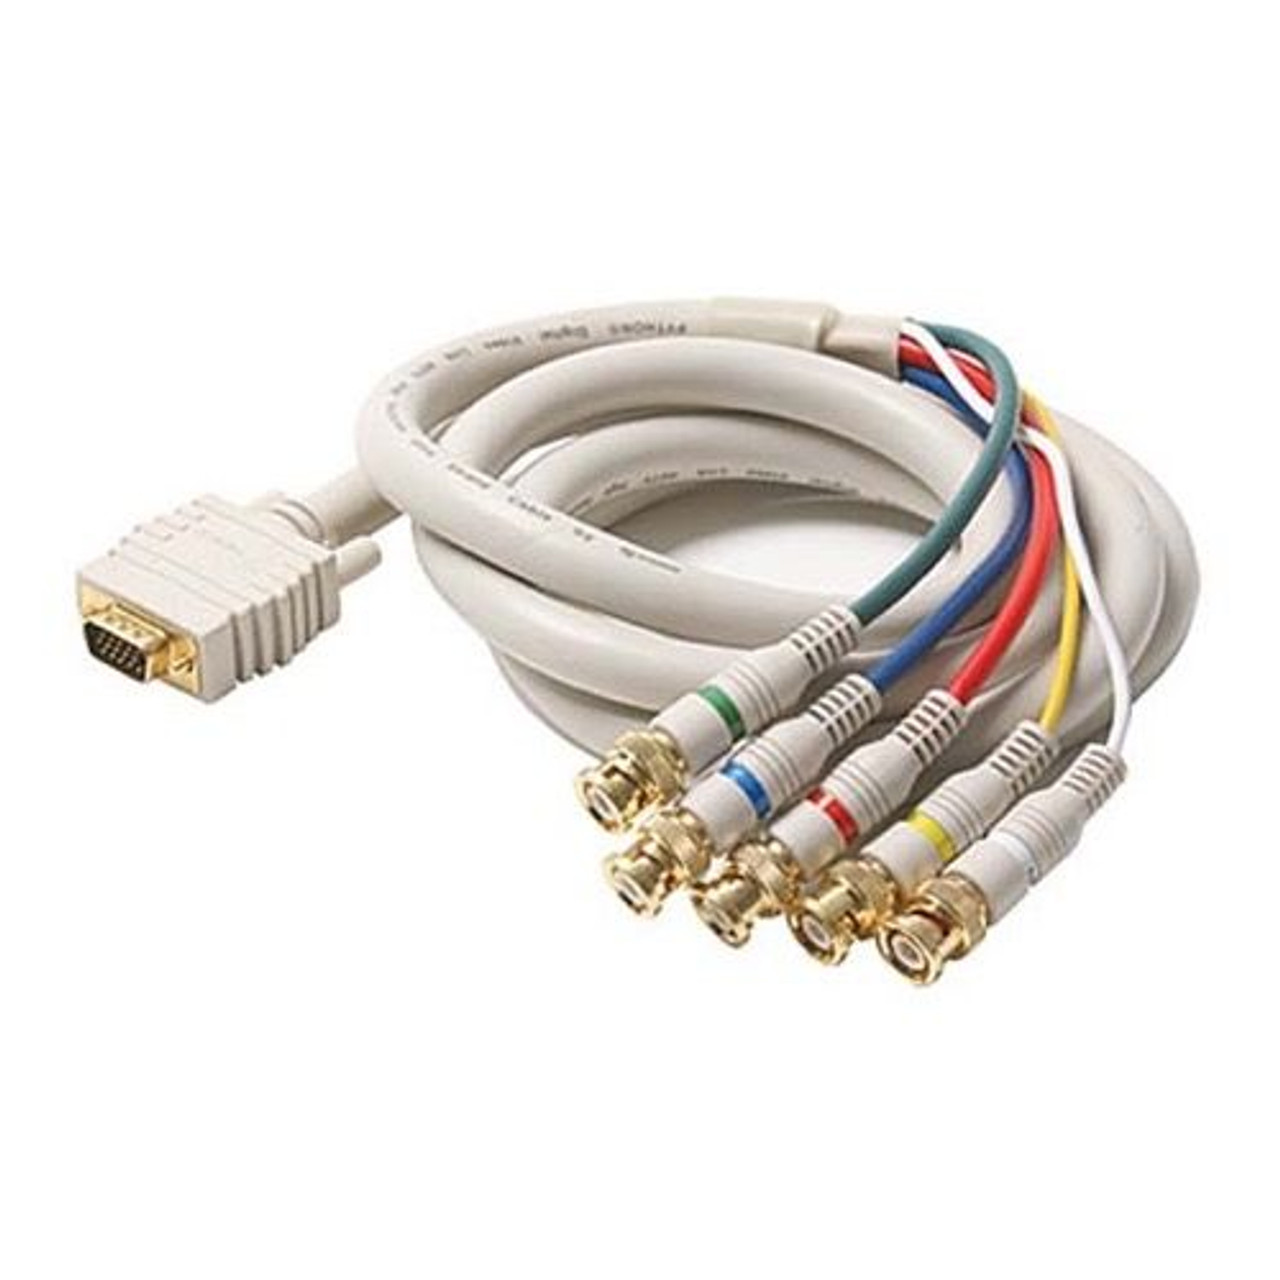 Eagle 12' FT VGA 5 BNC Component Cable HD-15 Male 15 Pin Ivory Double Shielded RGBHV Video VGA RGBYW Audio Dual Shield Ivory Cable Stereo 5-BNC Male to SVGA 24 K Gold Plate Color Coded